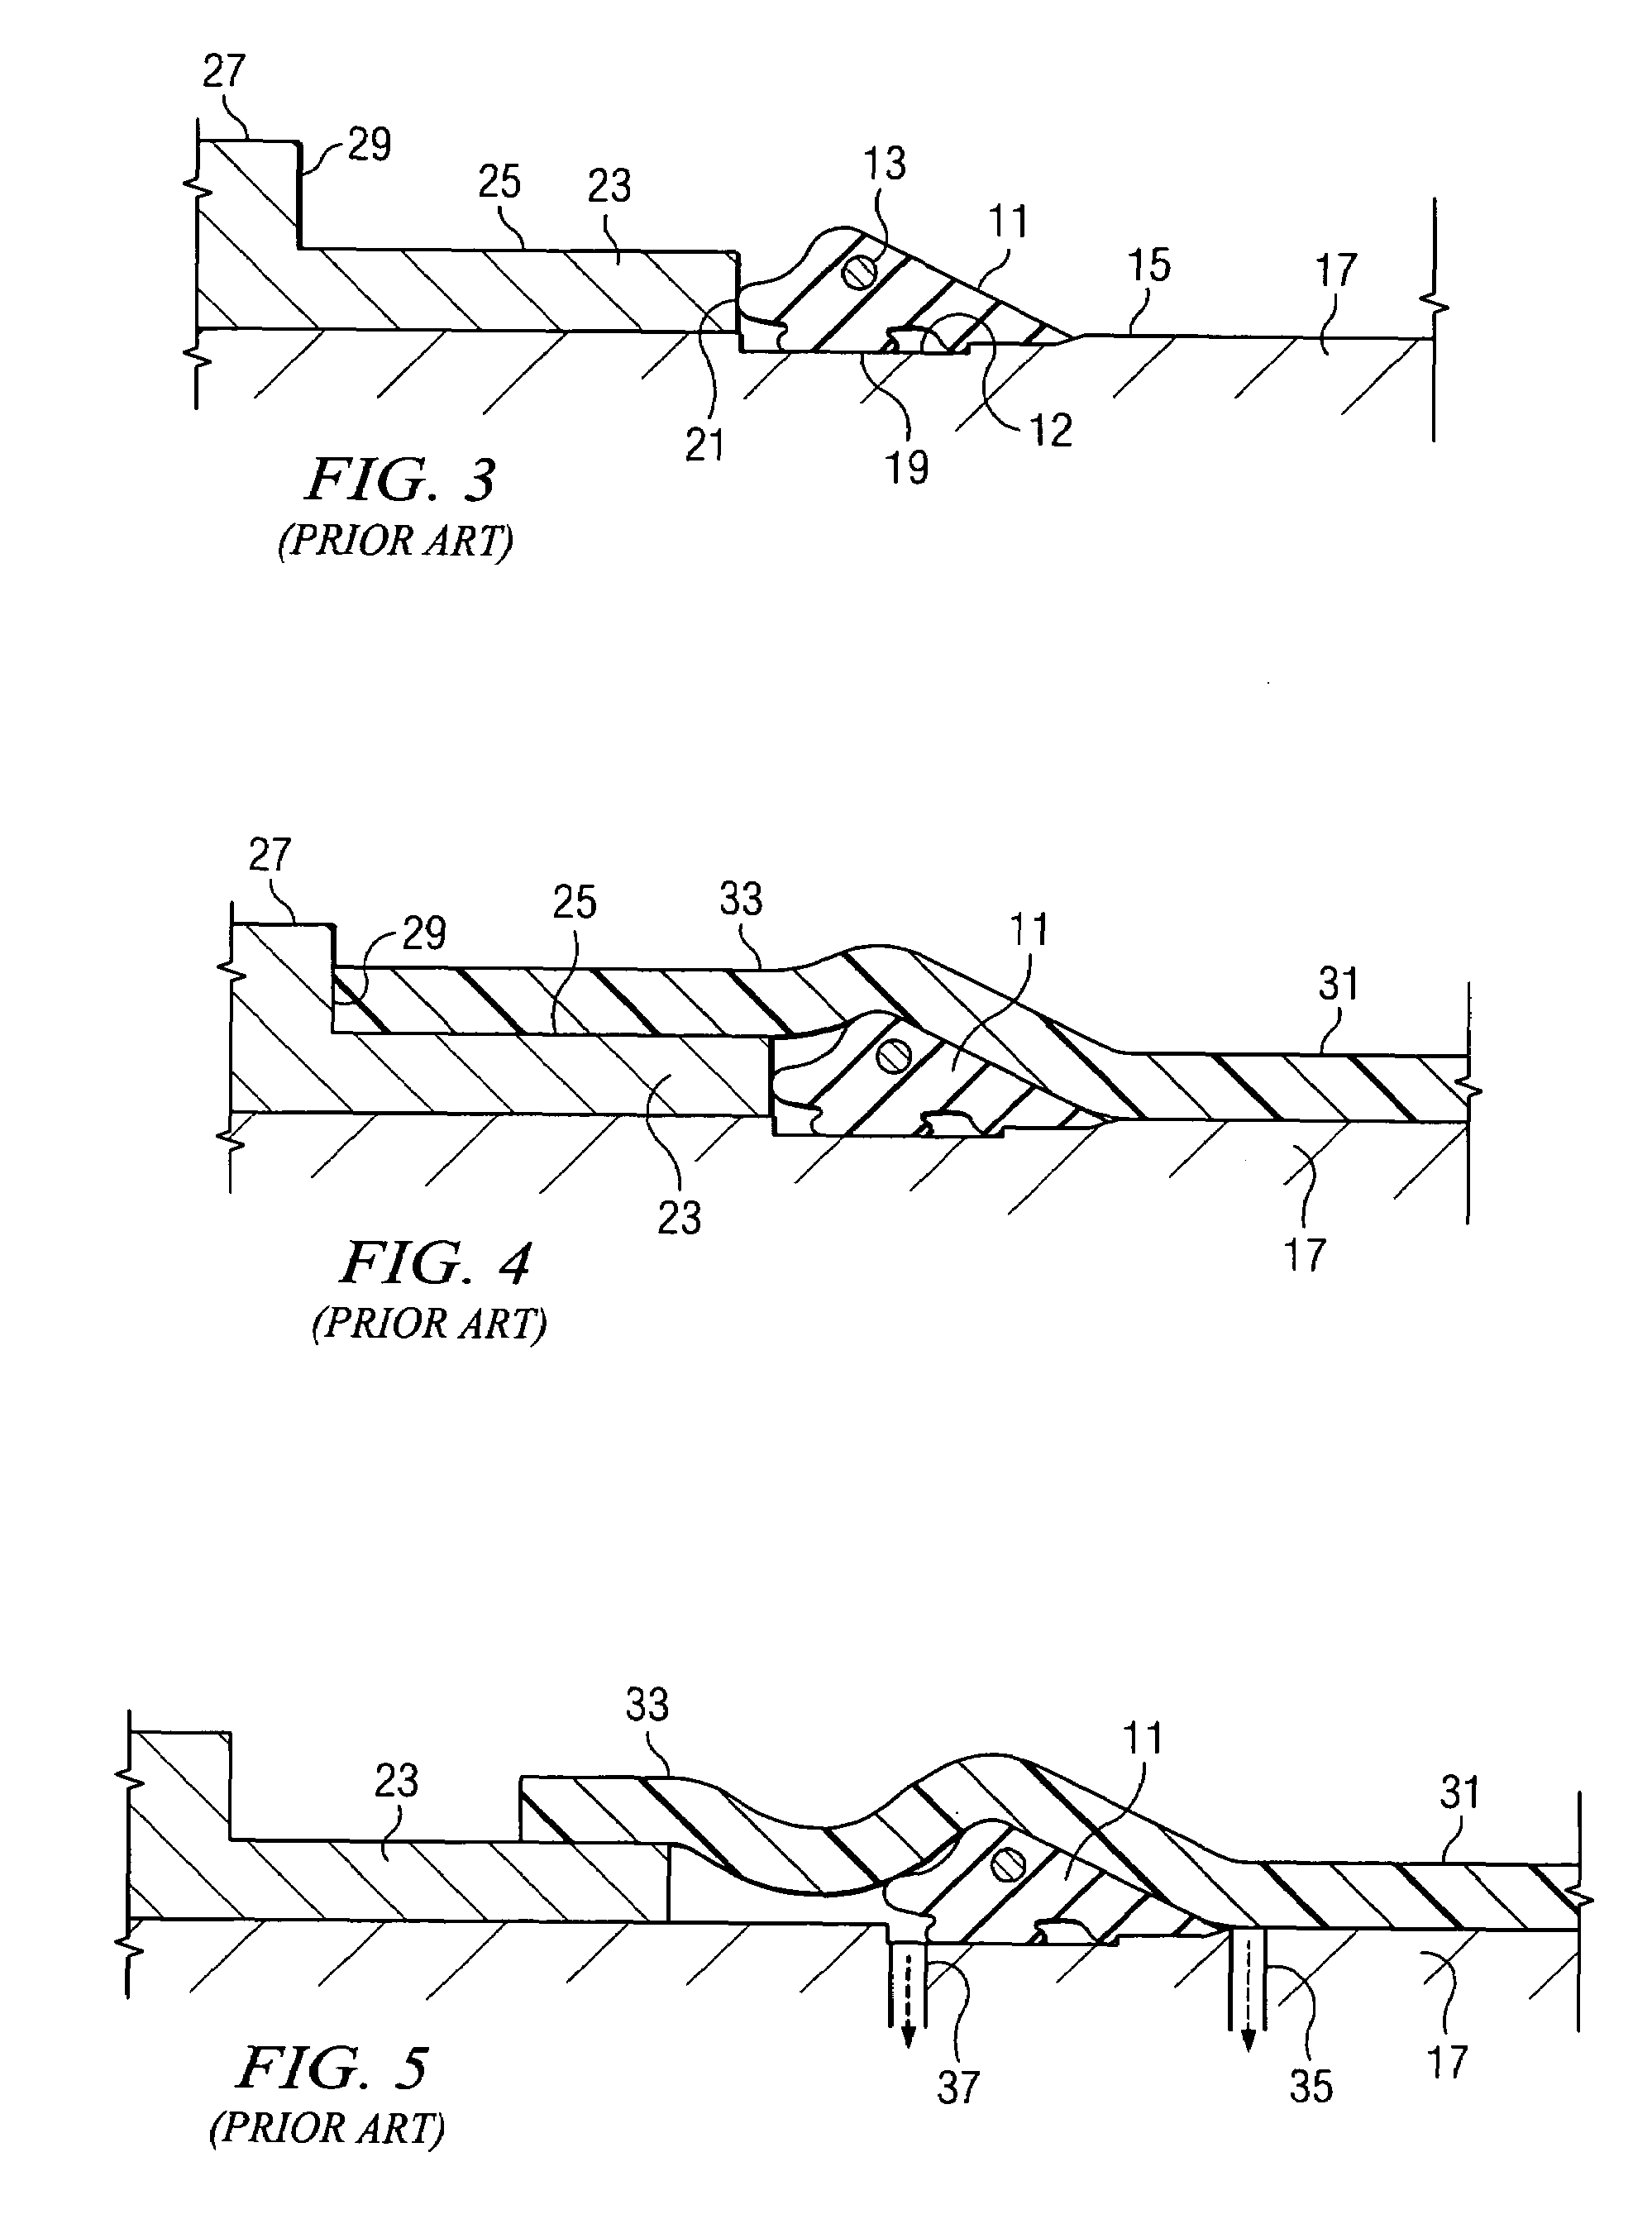 Pipe gasket with selective economy of scale